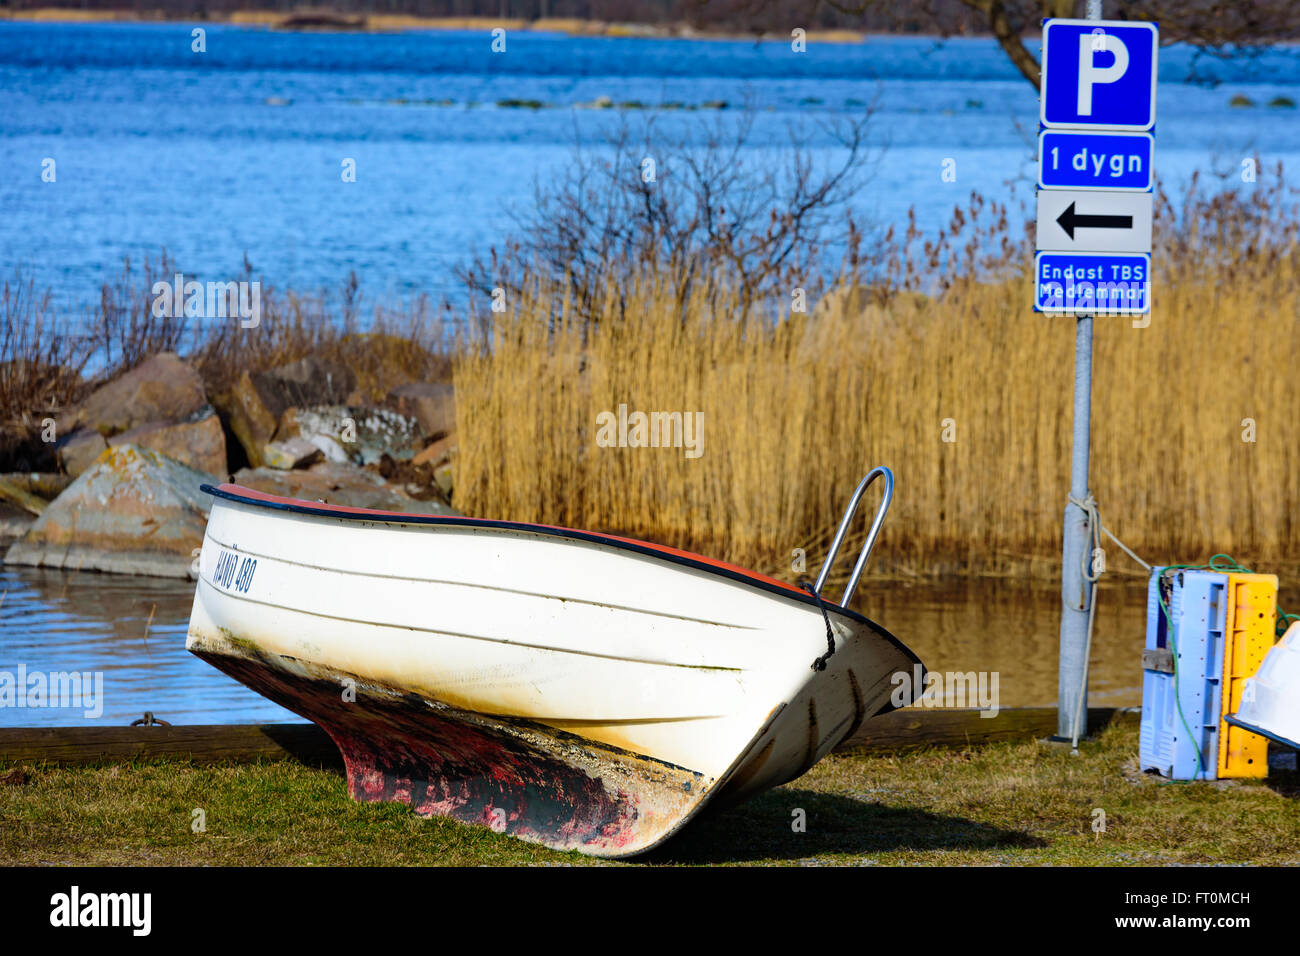 Torhamn, Sweden - March 18, 2016: One small outboard motorboat parked at a parking place on land. The sea in the background. Stock Photo